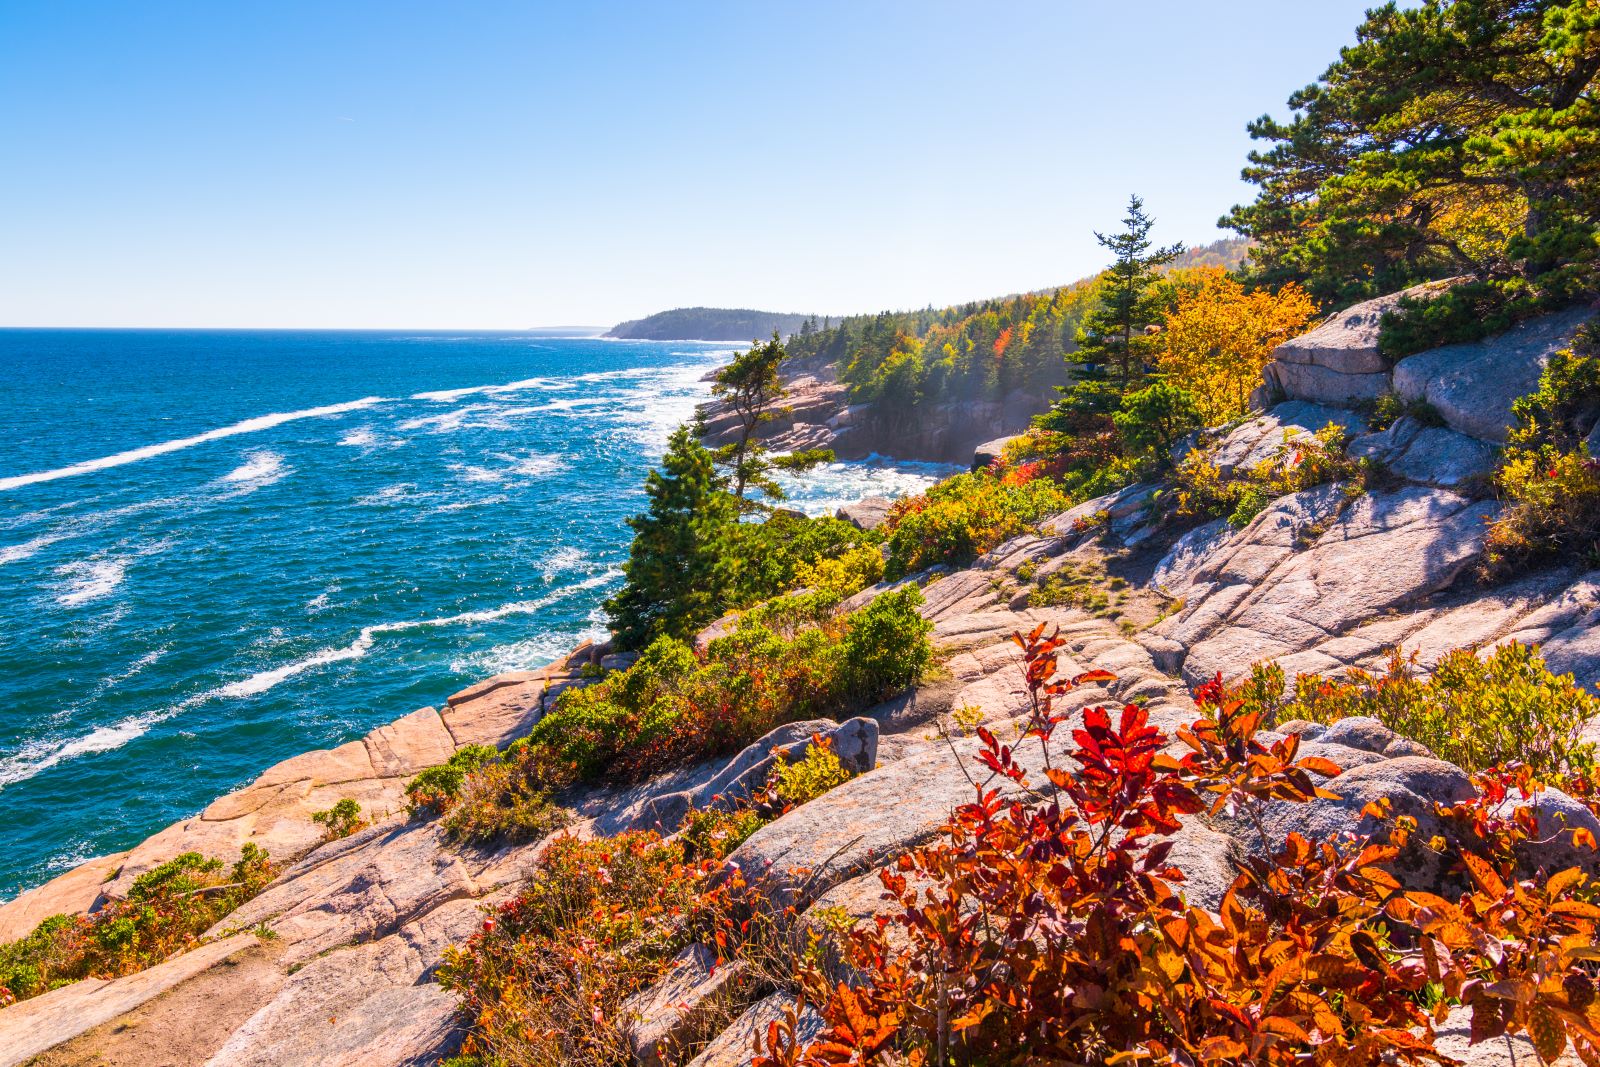 Image credit: Shutterstock / Eric Urquhart <p>Acadia is a place we return to often. The park’s natural beauty and the variety of outdoor activities make it an ideal spot for active families. Tip: Plan your visit around park ranger-led activities, which are both fun and educational.</p>